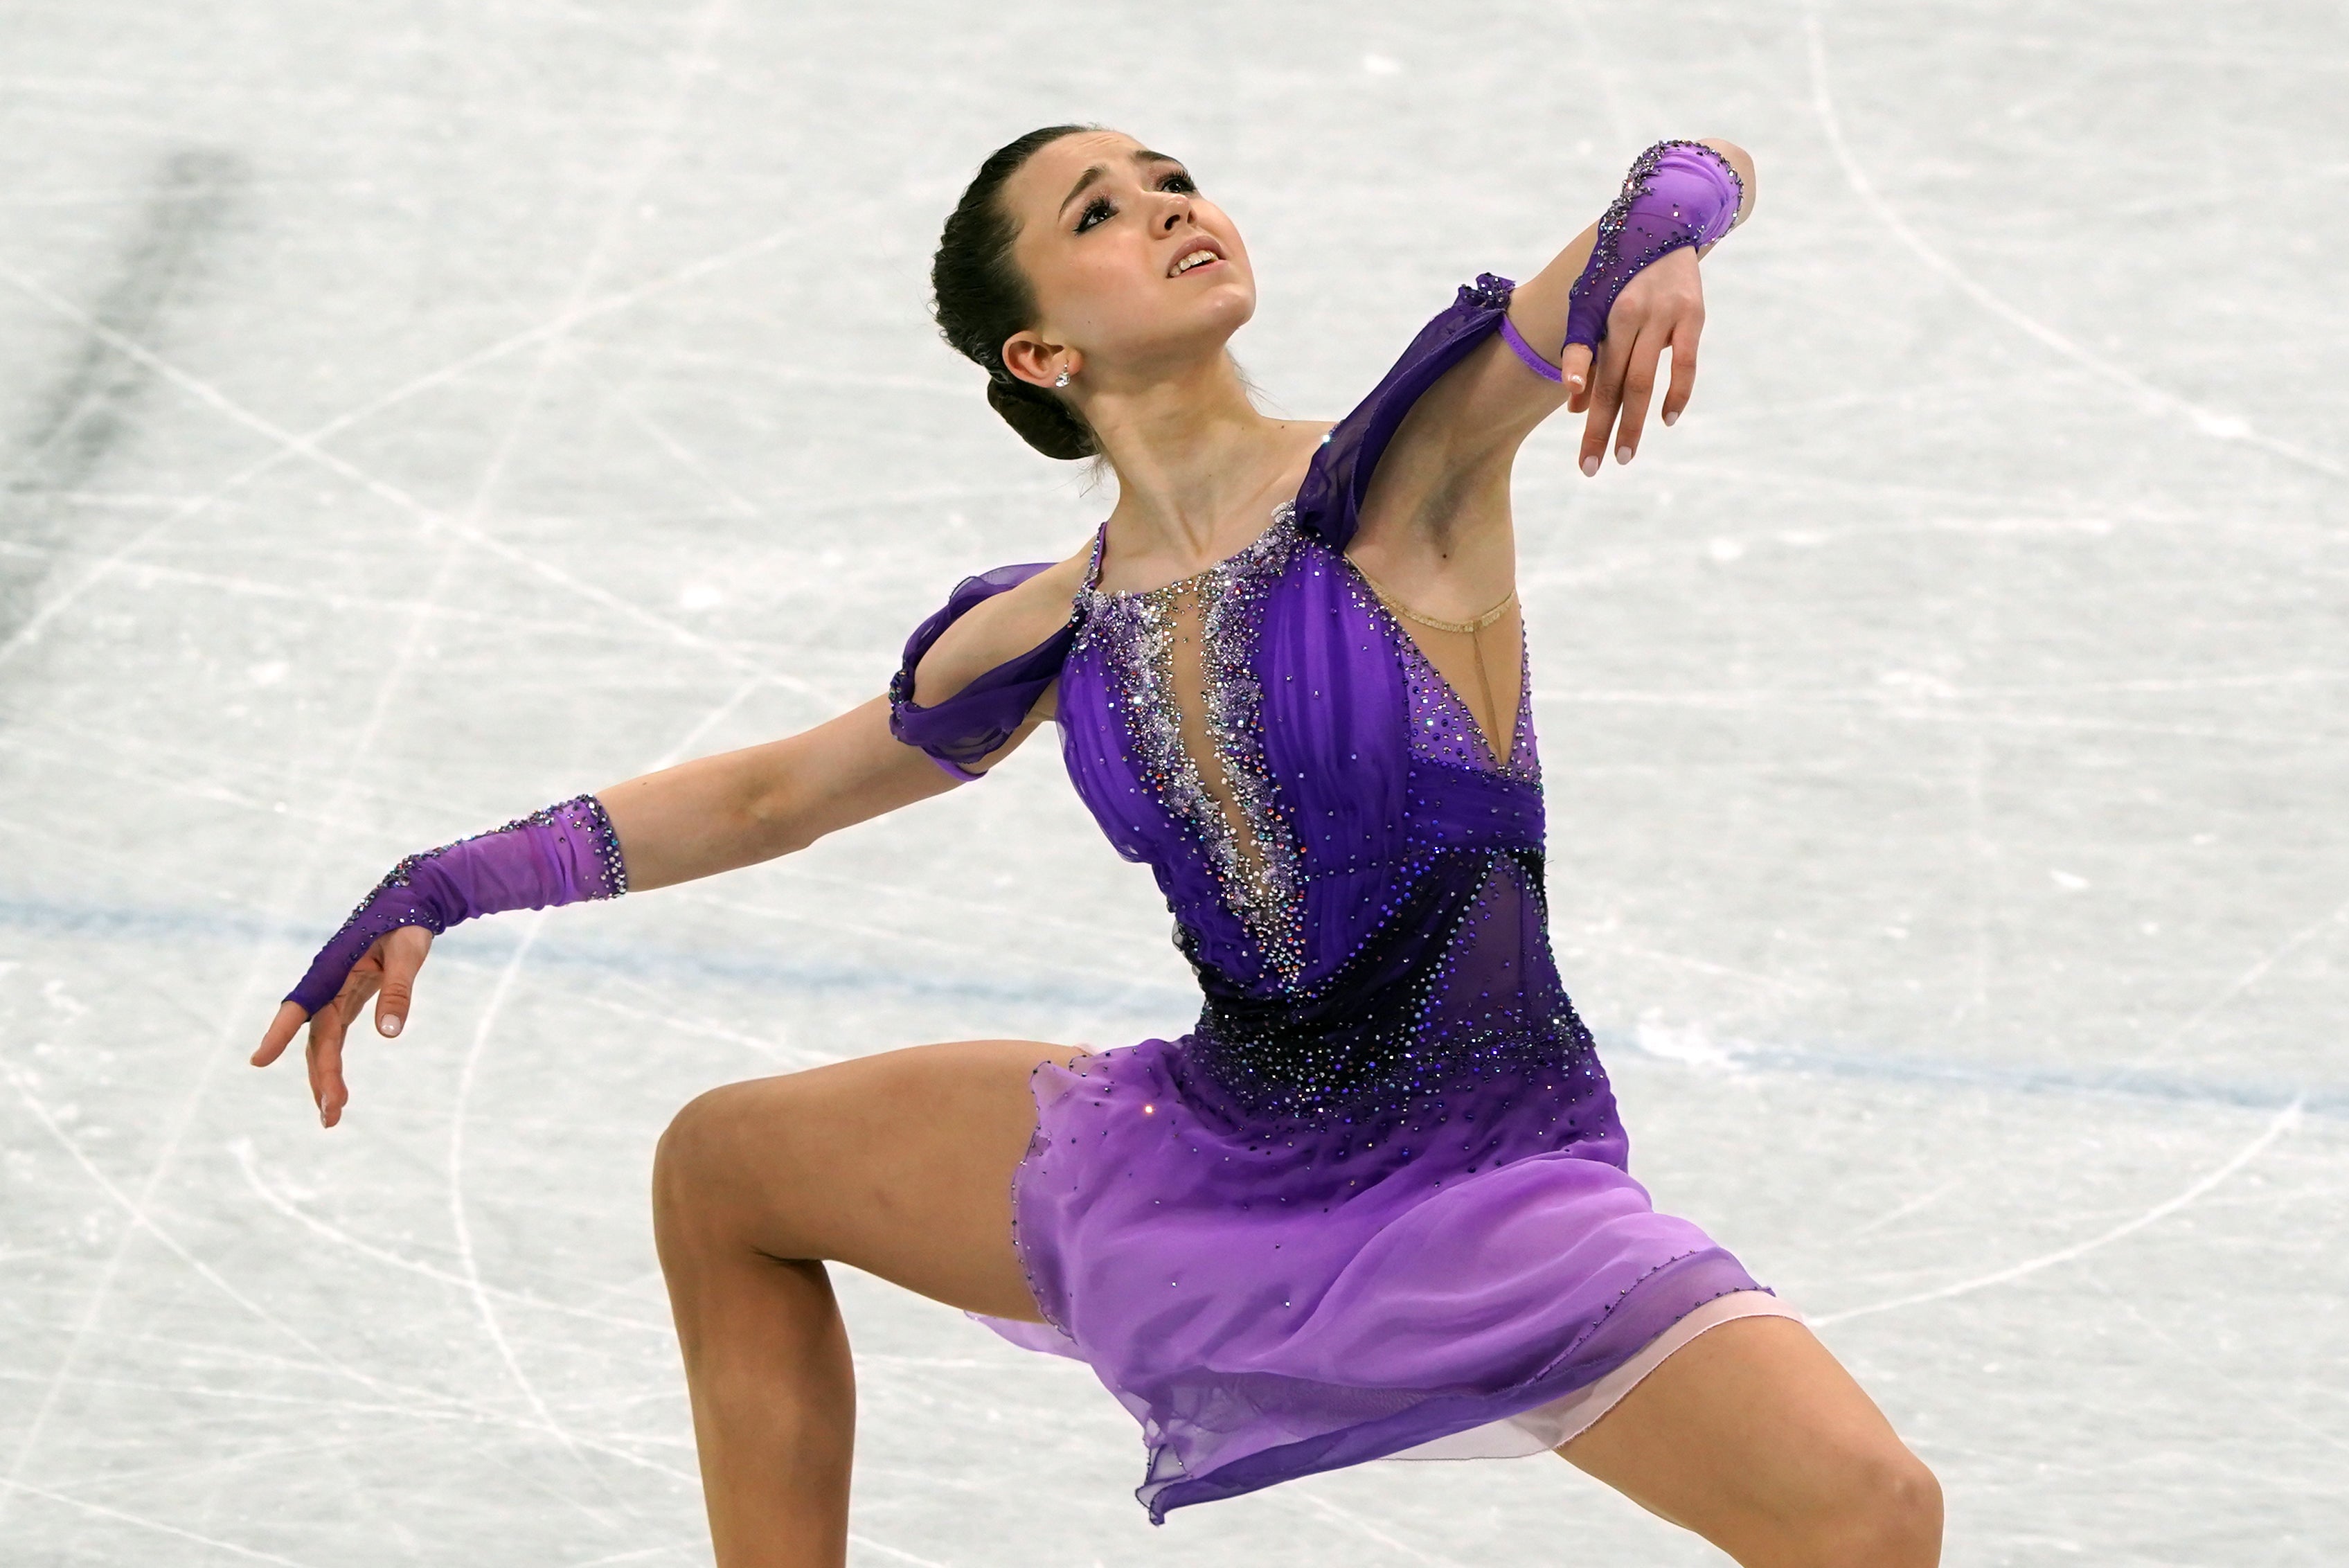 Russian figure skater Kamila Valieva’s continued participation in the Winter Olympics is in doubt following a failed drug test (Andrew Milligan/GB)